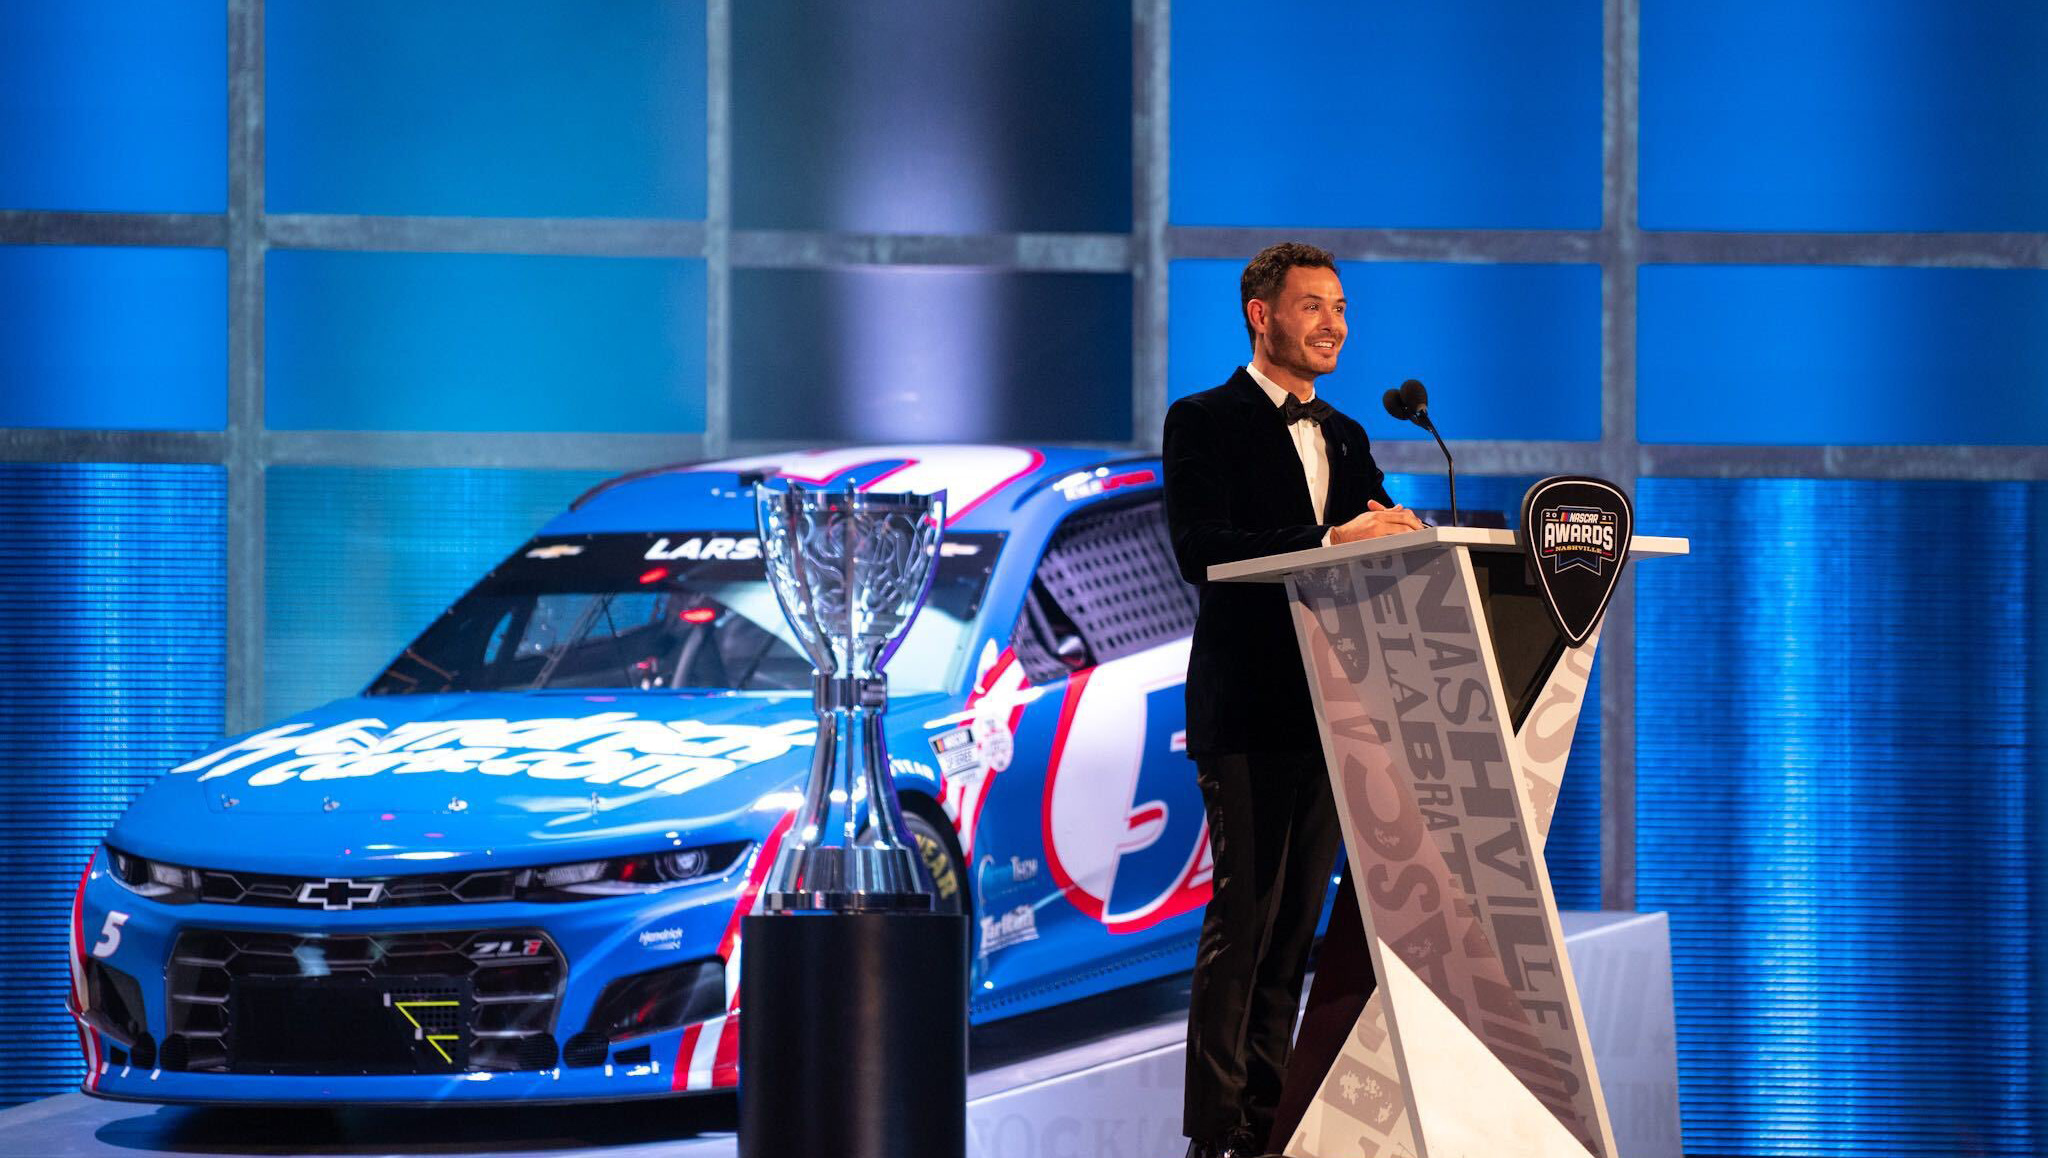 NASCAR Champion’s Banquet Filled With FeelGood Moments